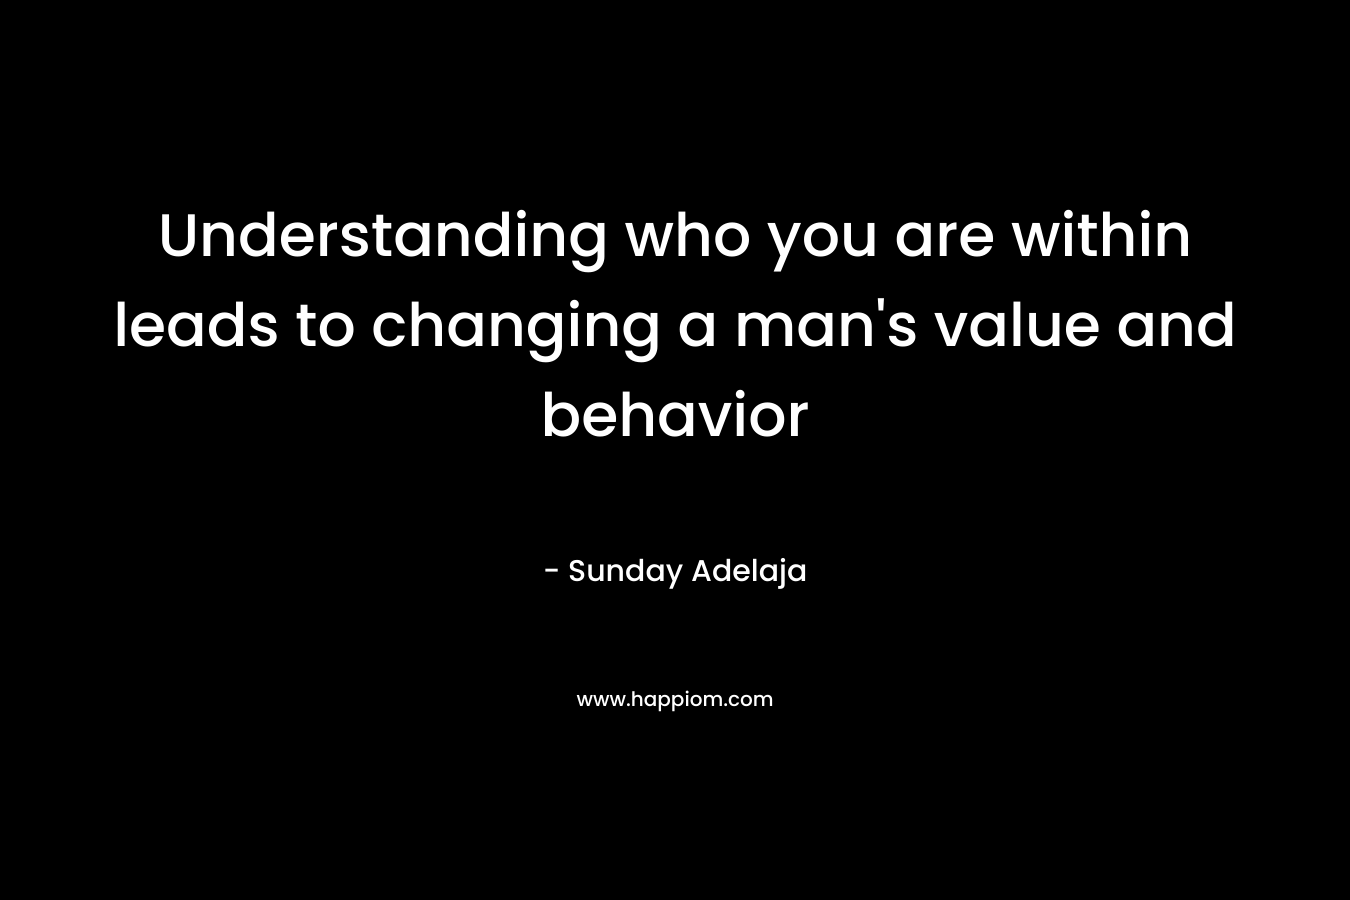 Understanding who you are within leads to changing a man's value and behavior